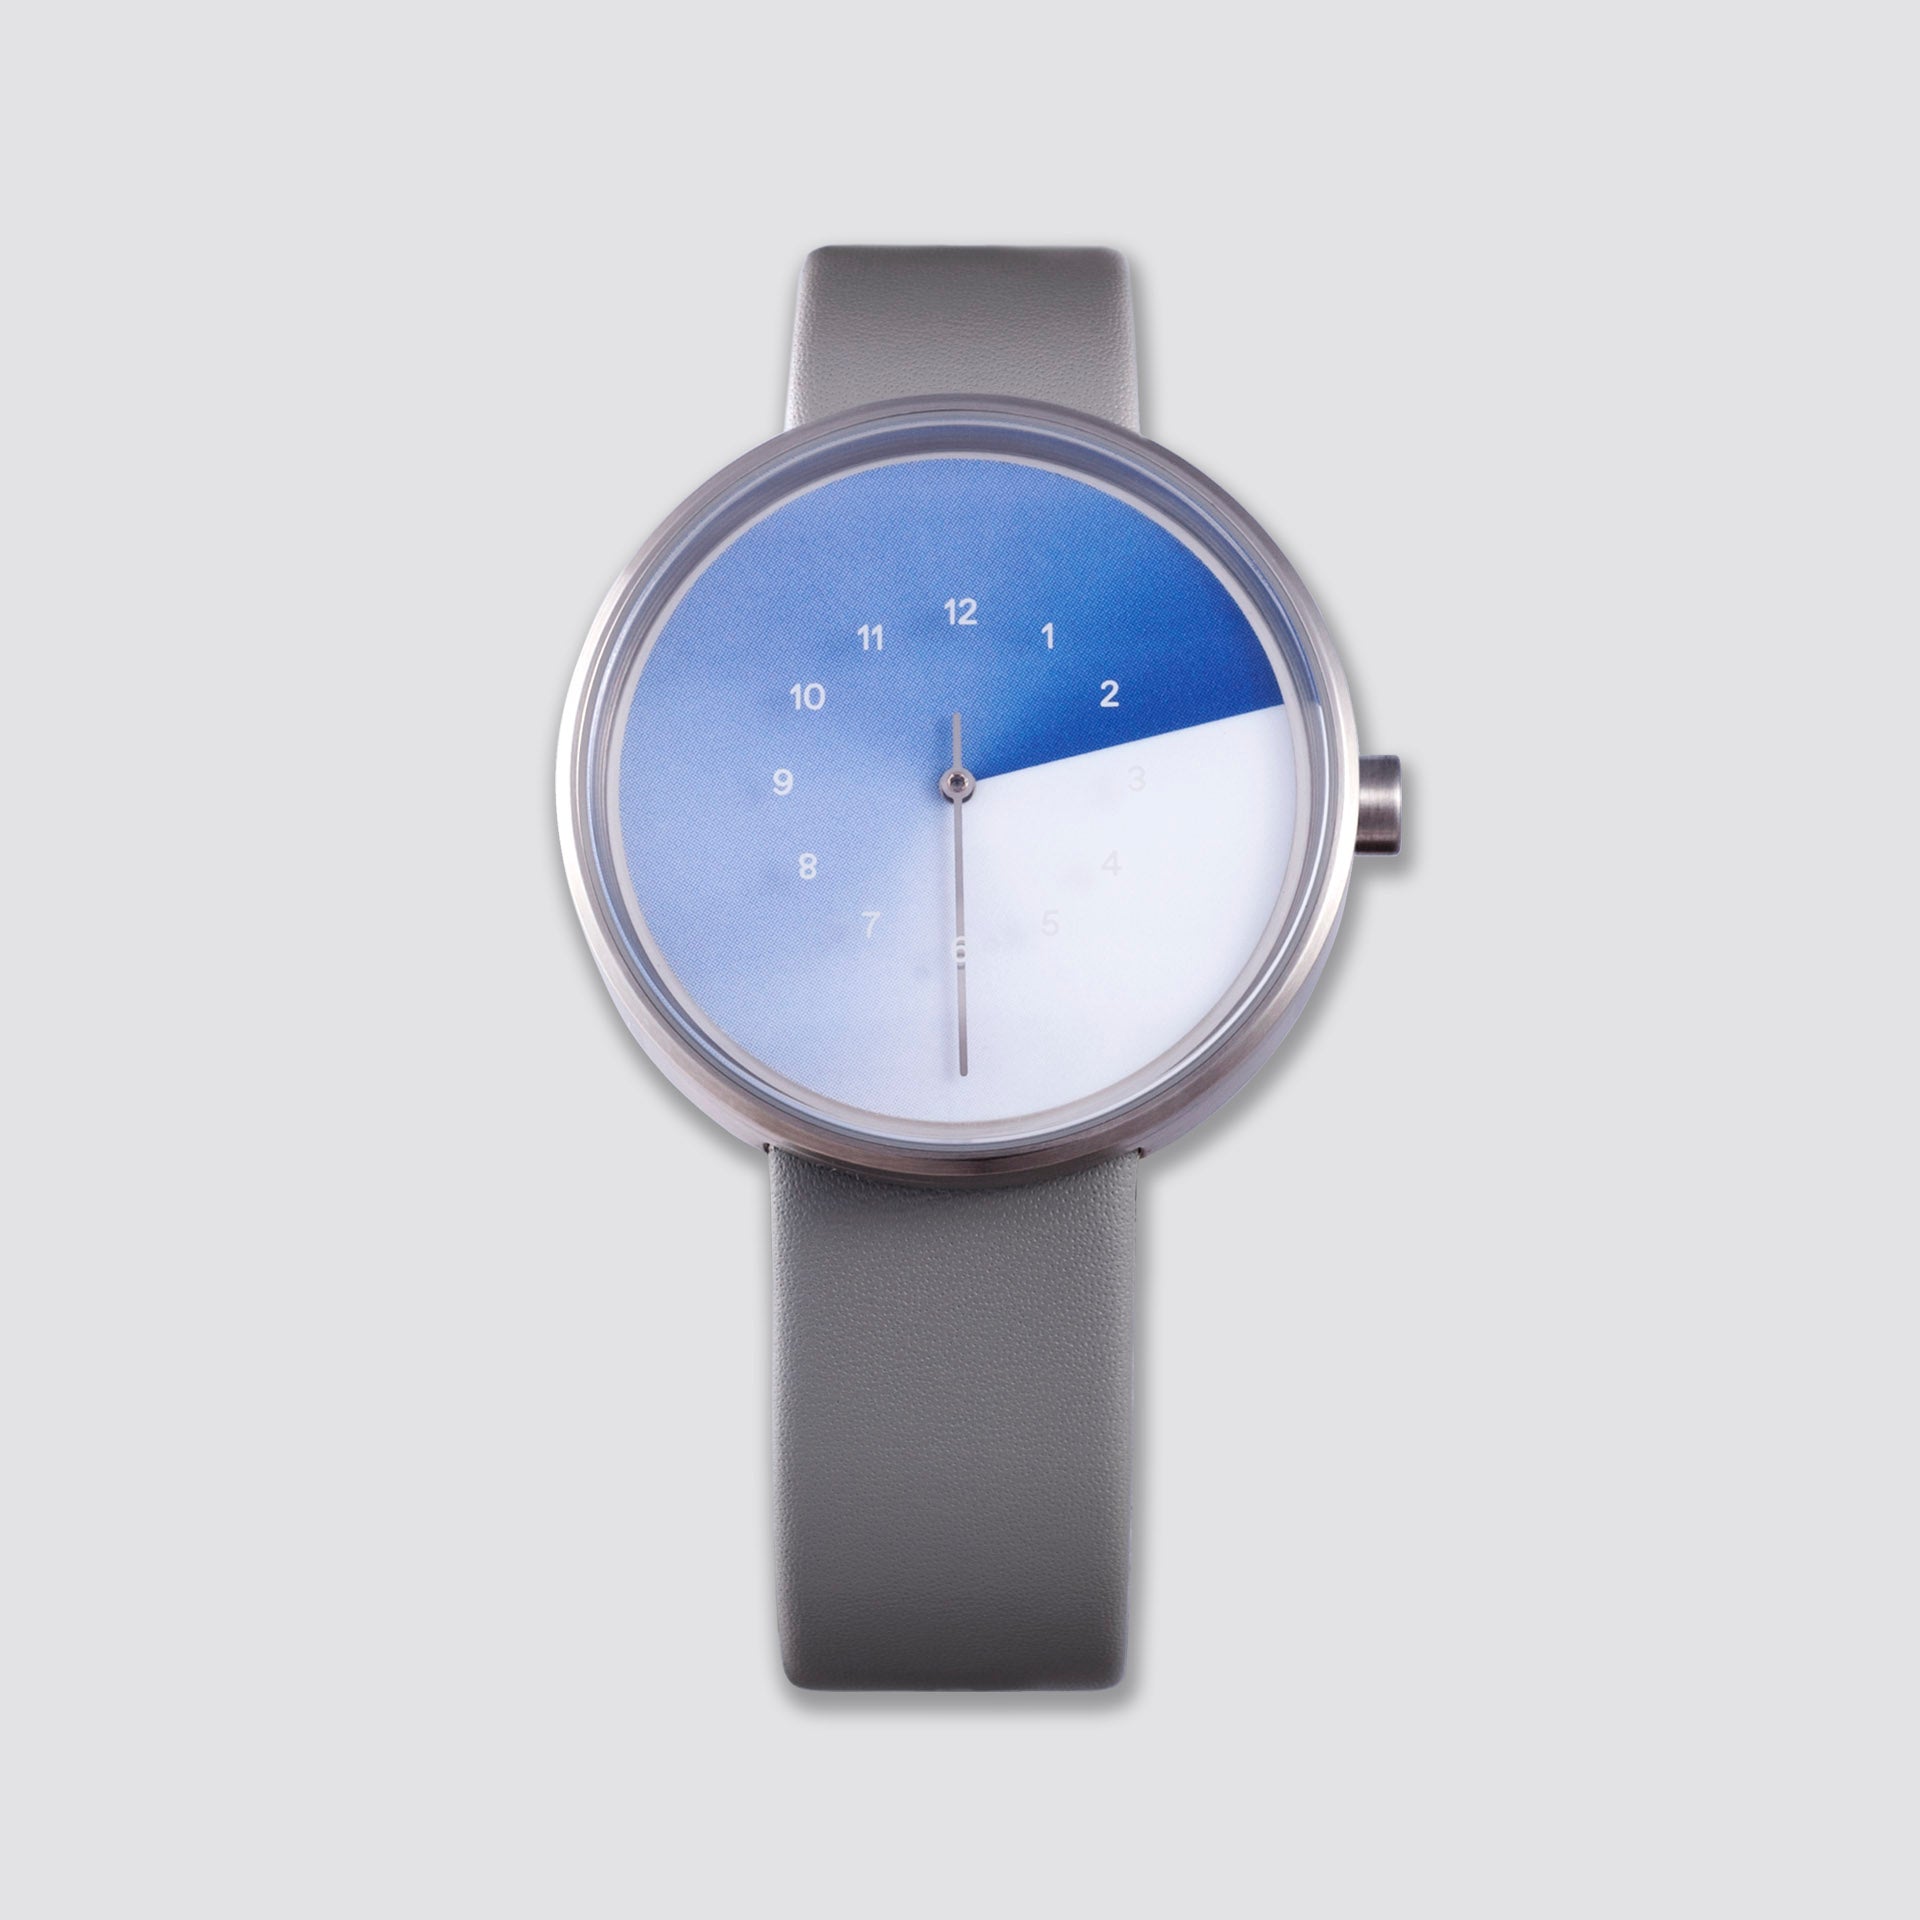 Front view of the TTT#1 - Seoul - Hidden Time Watch - Azure against a sleek gray background, showcasing the watch's signature gradient design that reveals the white hour numerals printed on the glass above